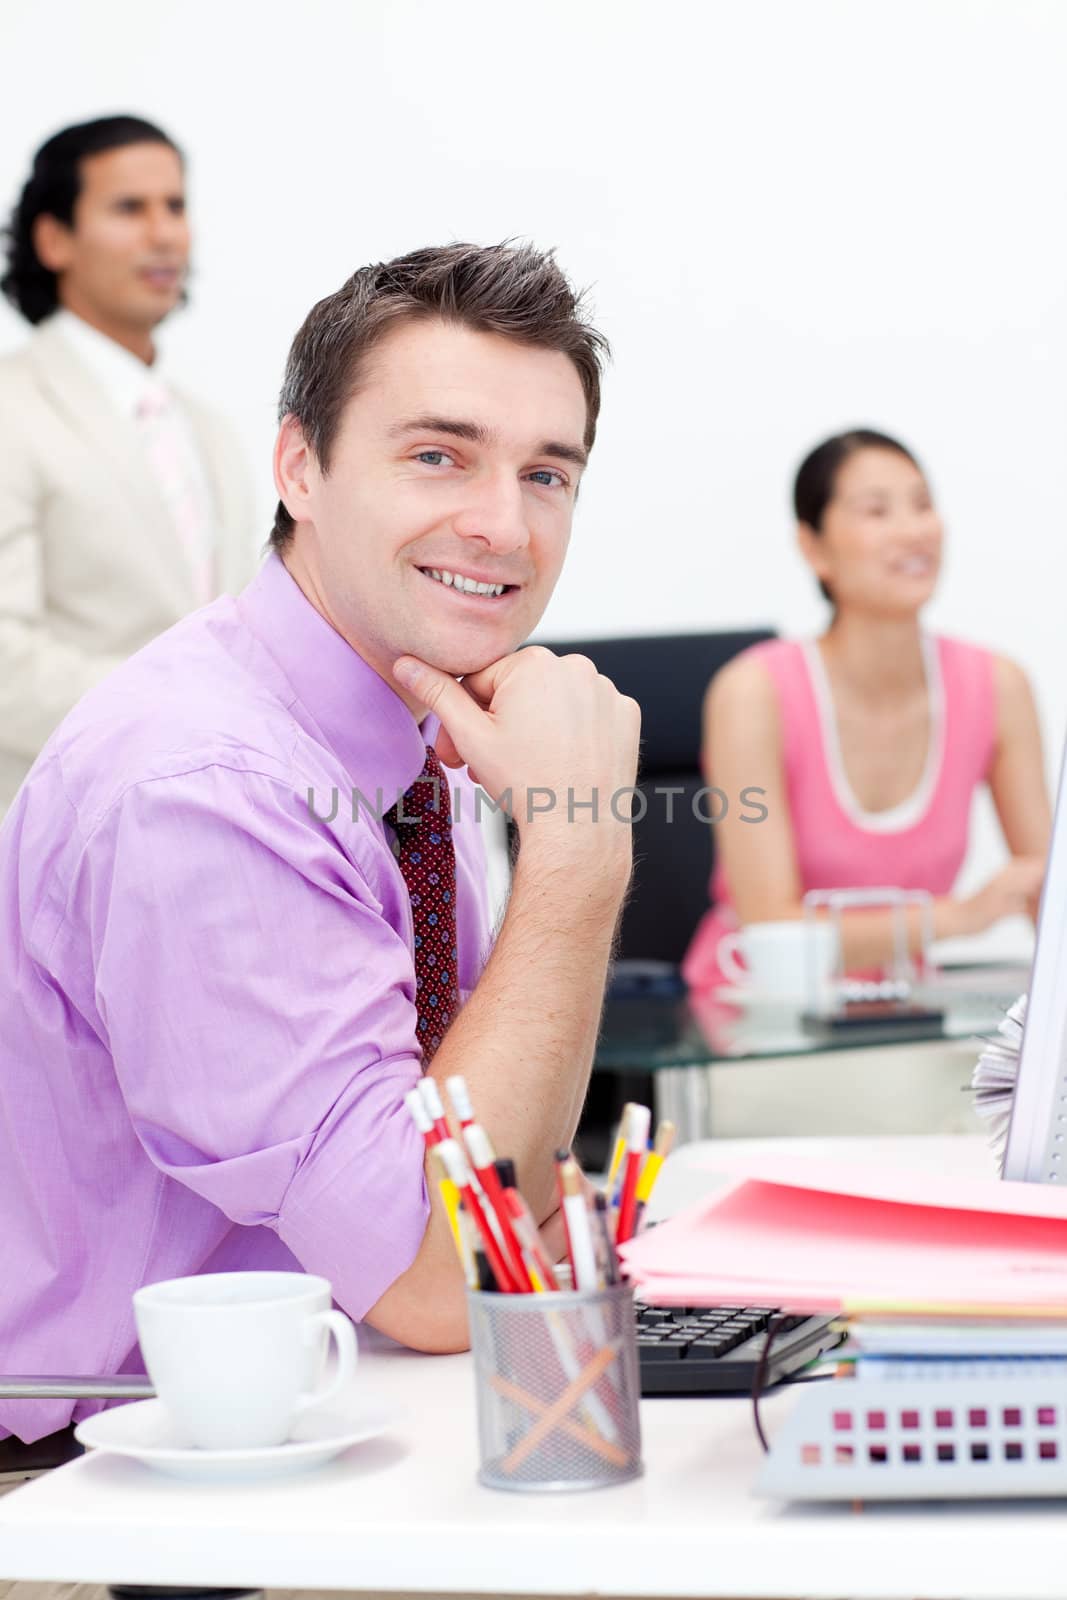 Attractive businessman smiling at the camera with his colleagues in the background